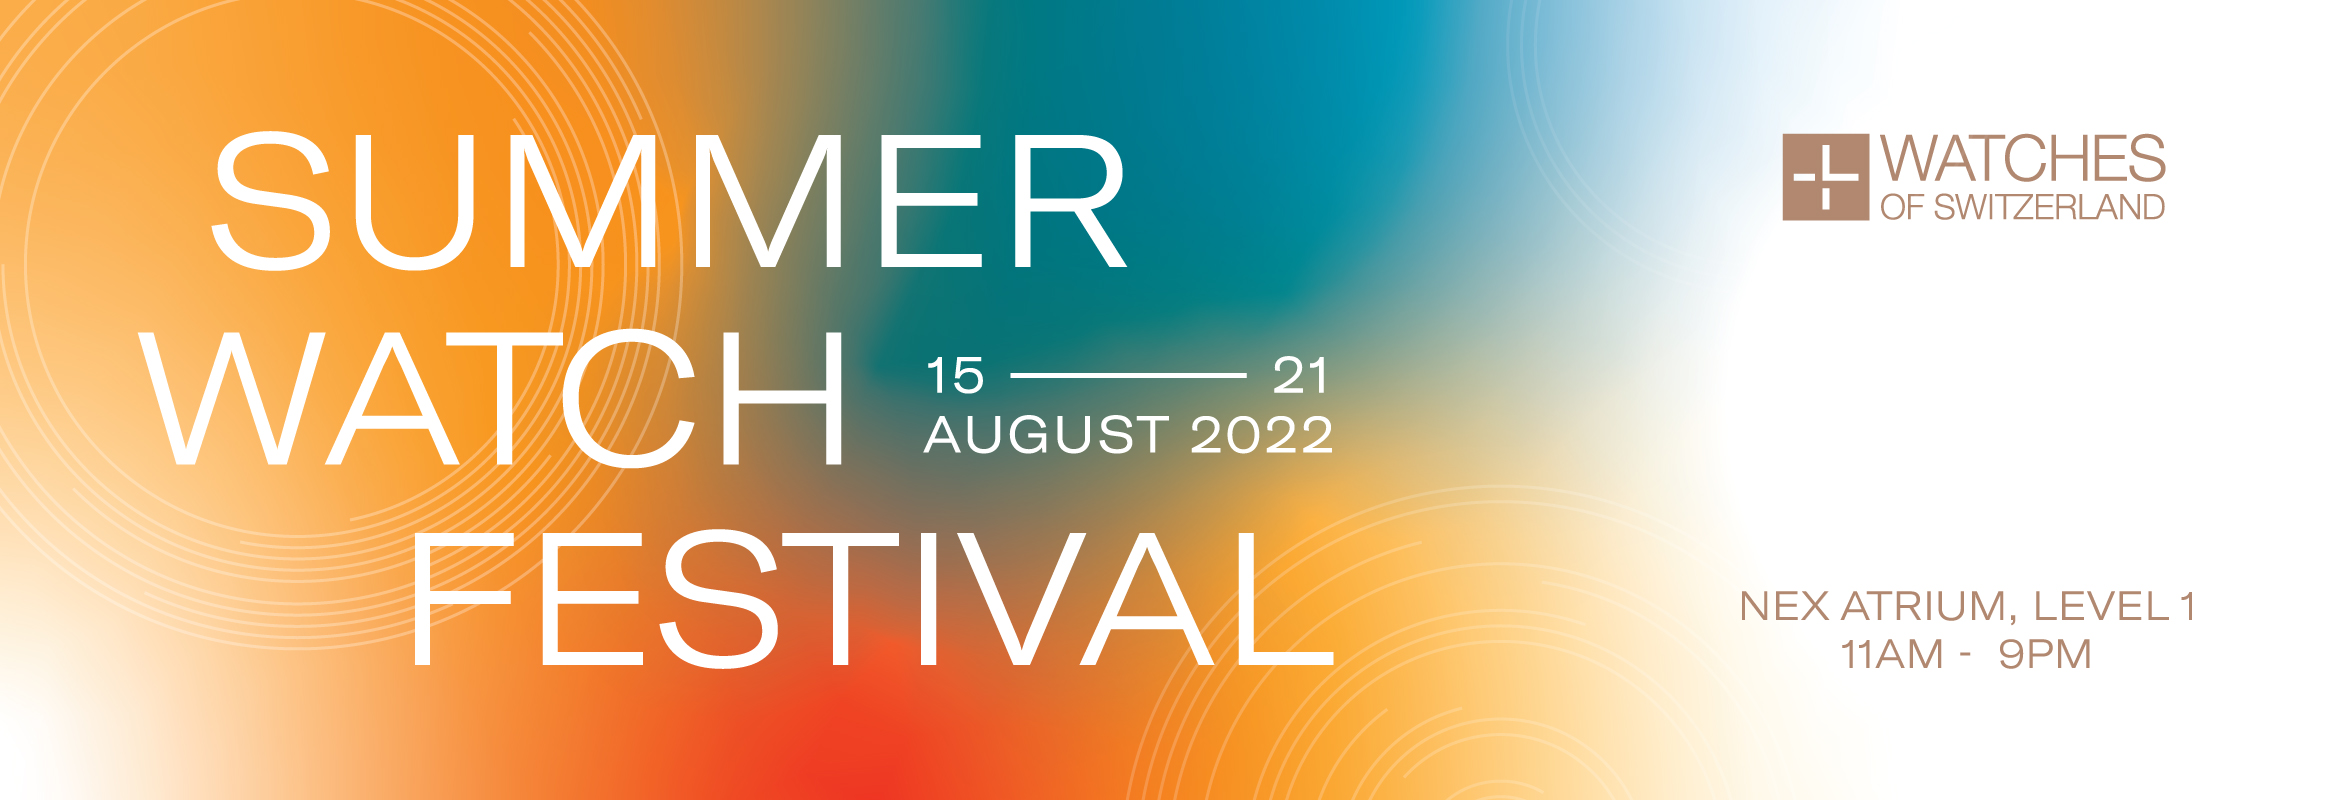 Coming Soon: Watches of Switzerland Summer Watch Festival